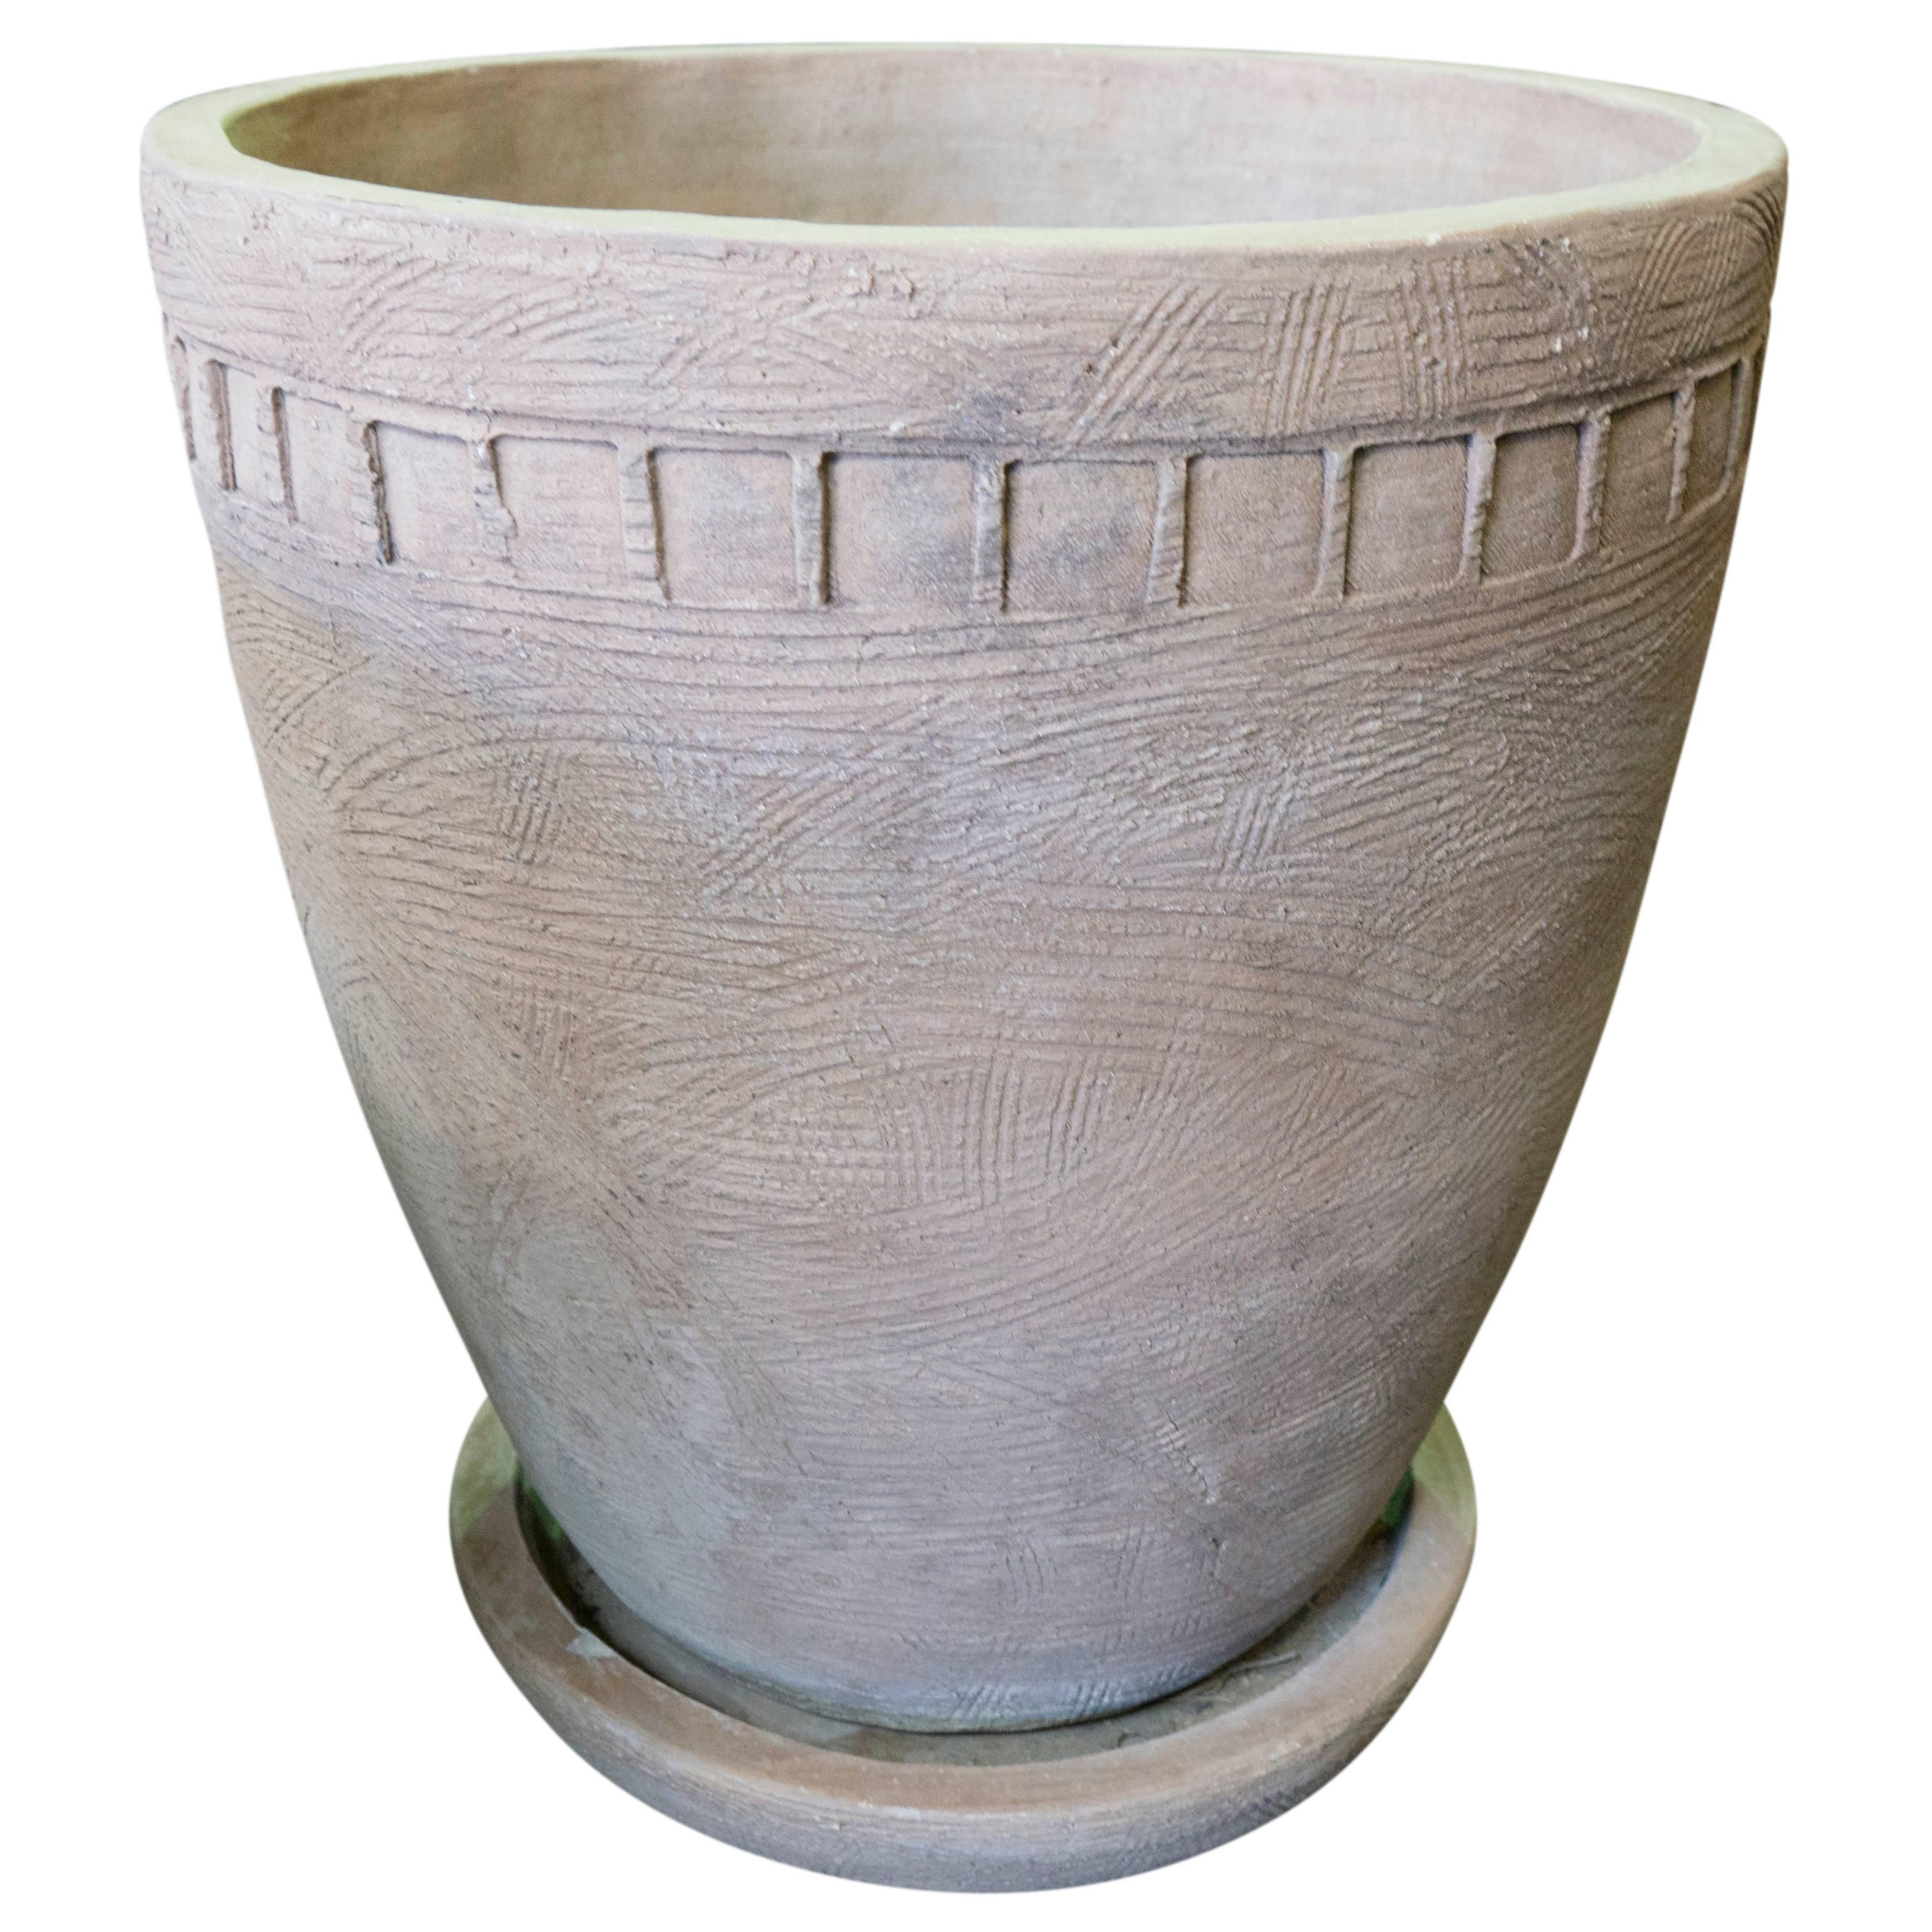 A piece of modern garden art hand built in California by Hans Sumpf in the late 1970s. This beautiful planter features square incised decoration around the body, and comes with a saucer custom designed to accompany the vessel.